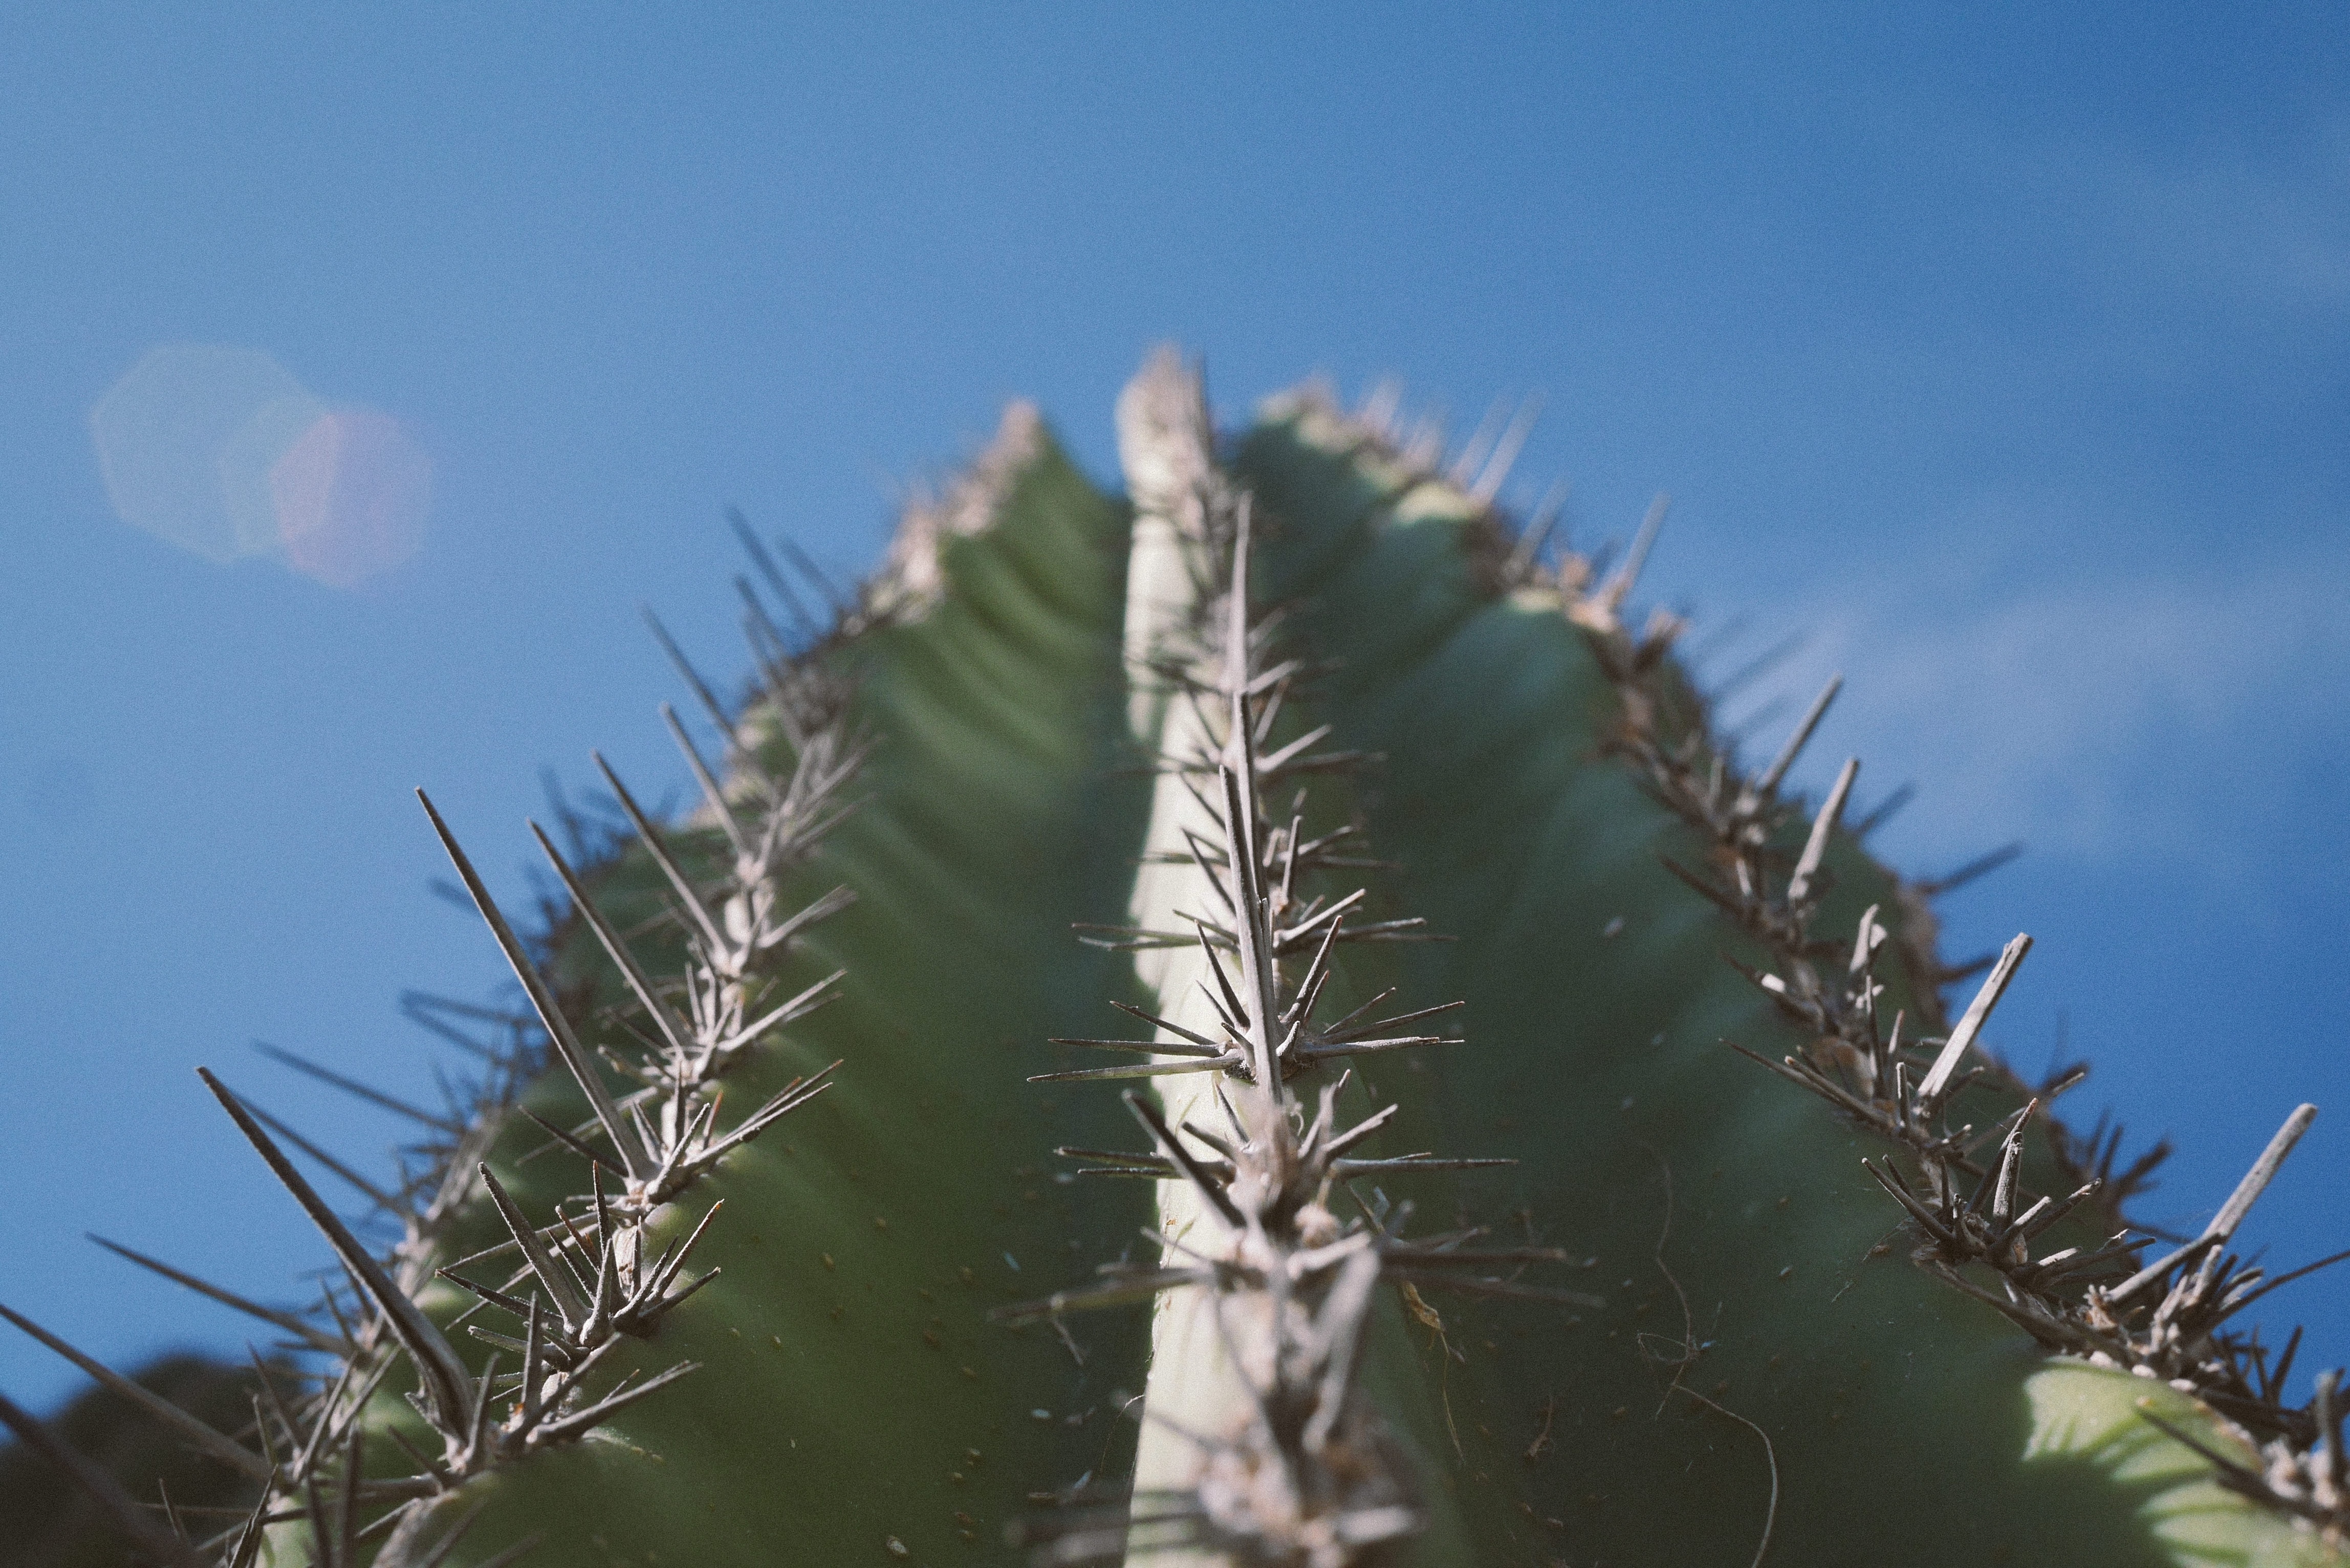 person takes picture of cactus thorns